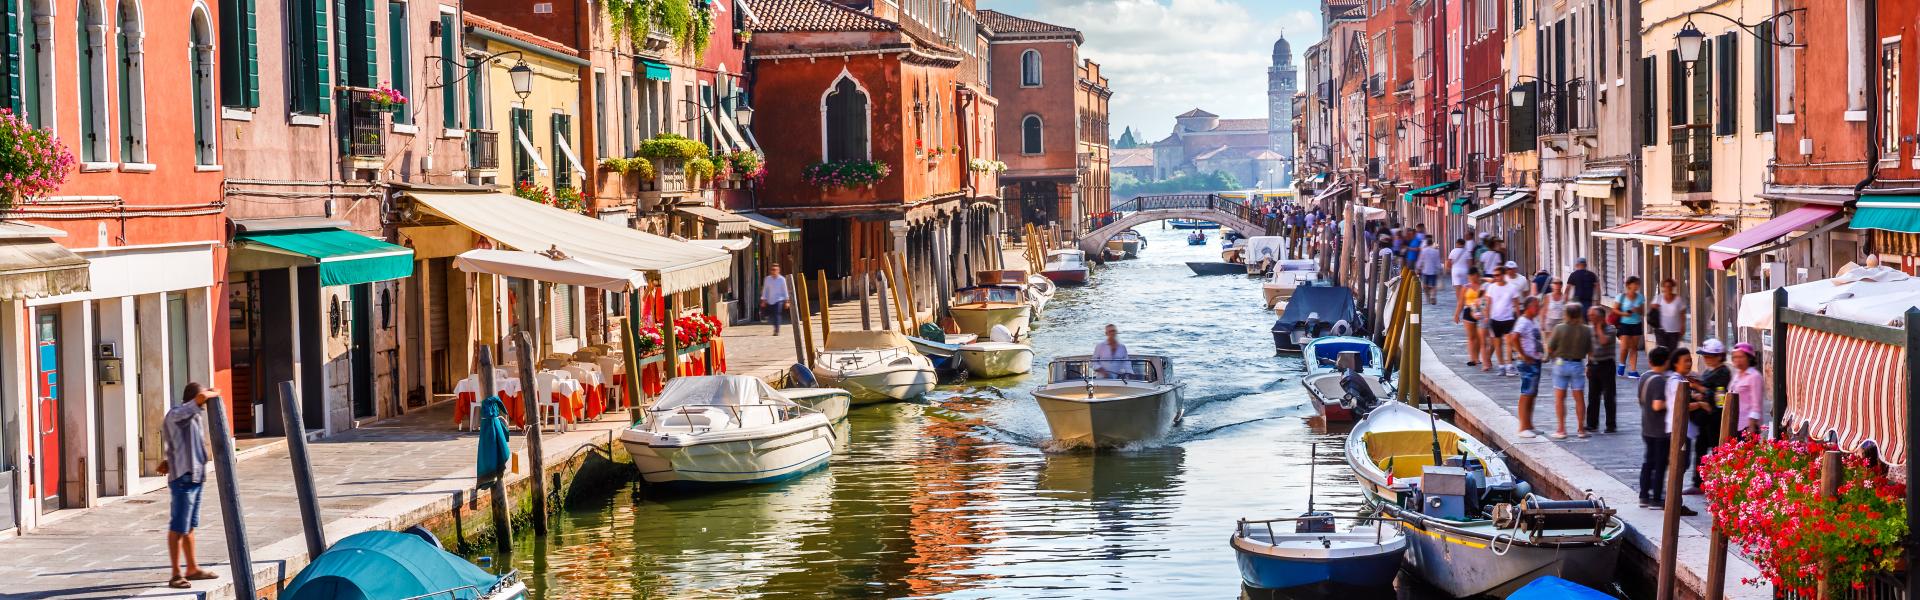 Find the perfect vacation home in Venice - Casamundo